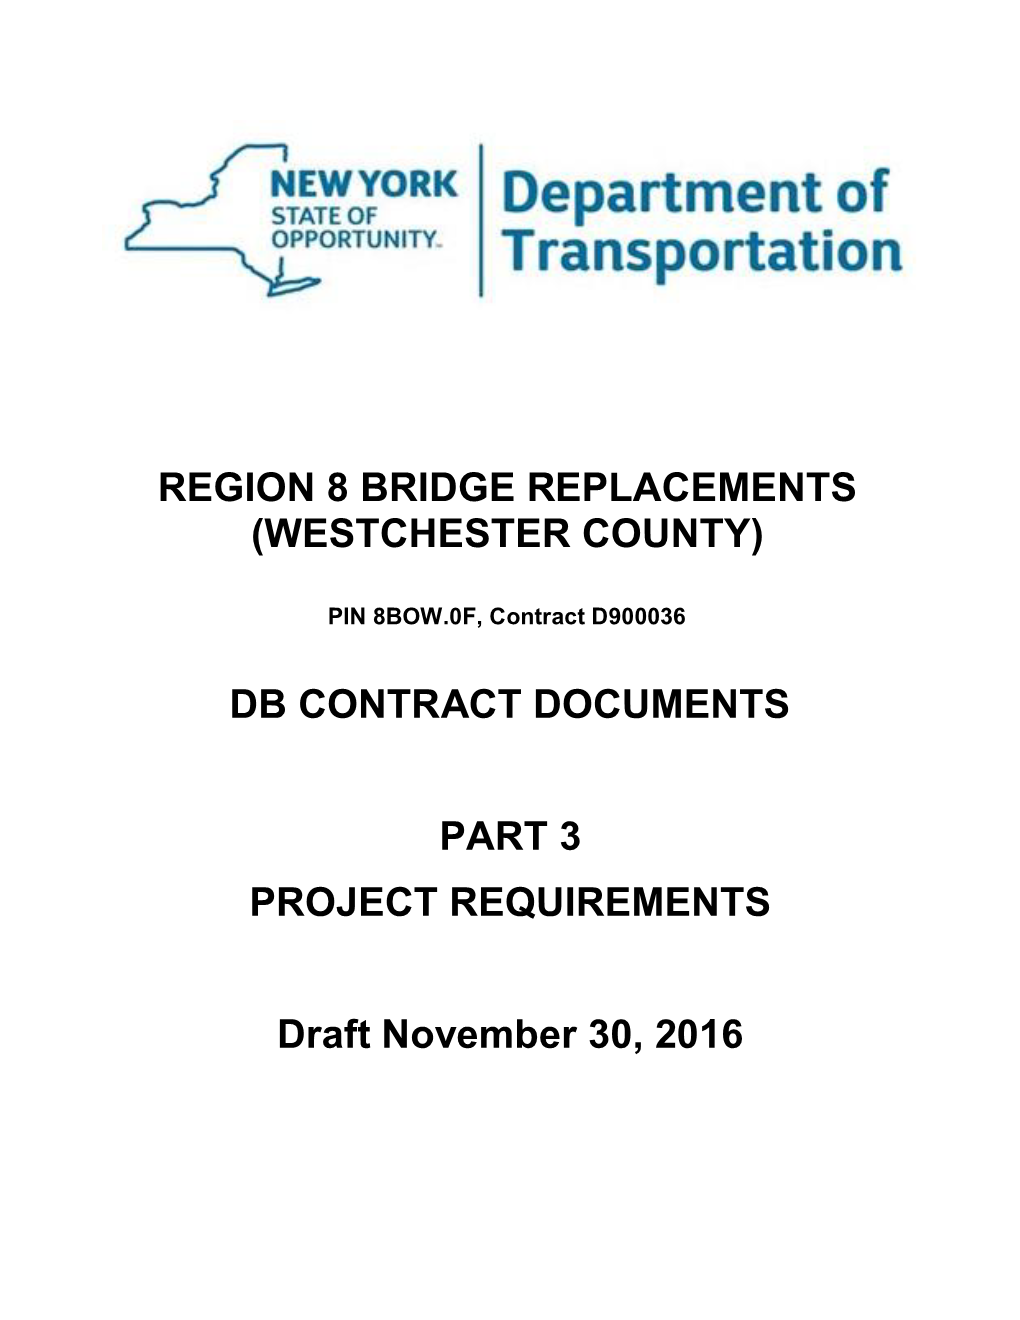 (WESTCHESTER COUNTY) DB CONTRACT DOCUMENTS PART 3 PROJECT REQUIREMENTS Draft November 30, 2016